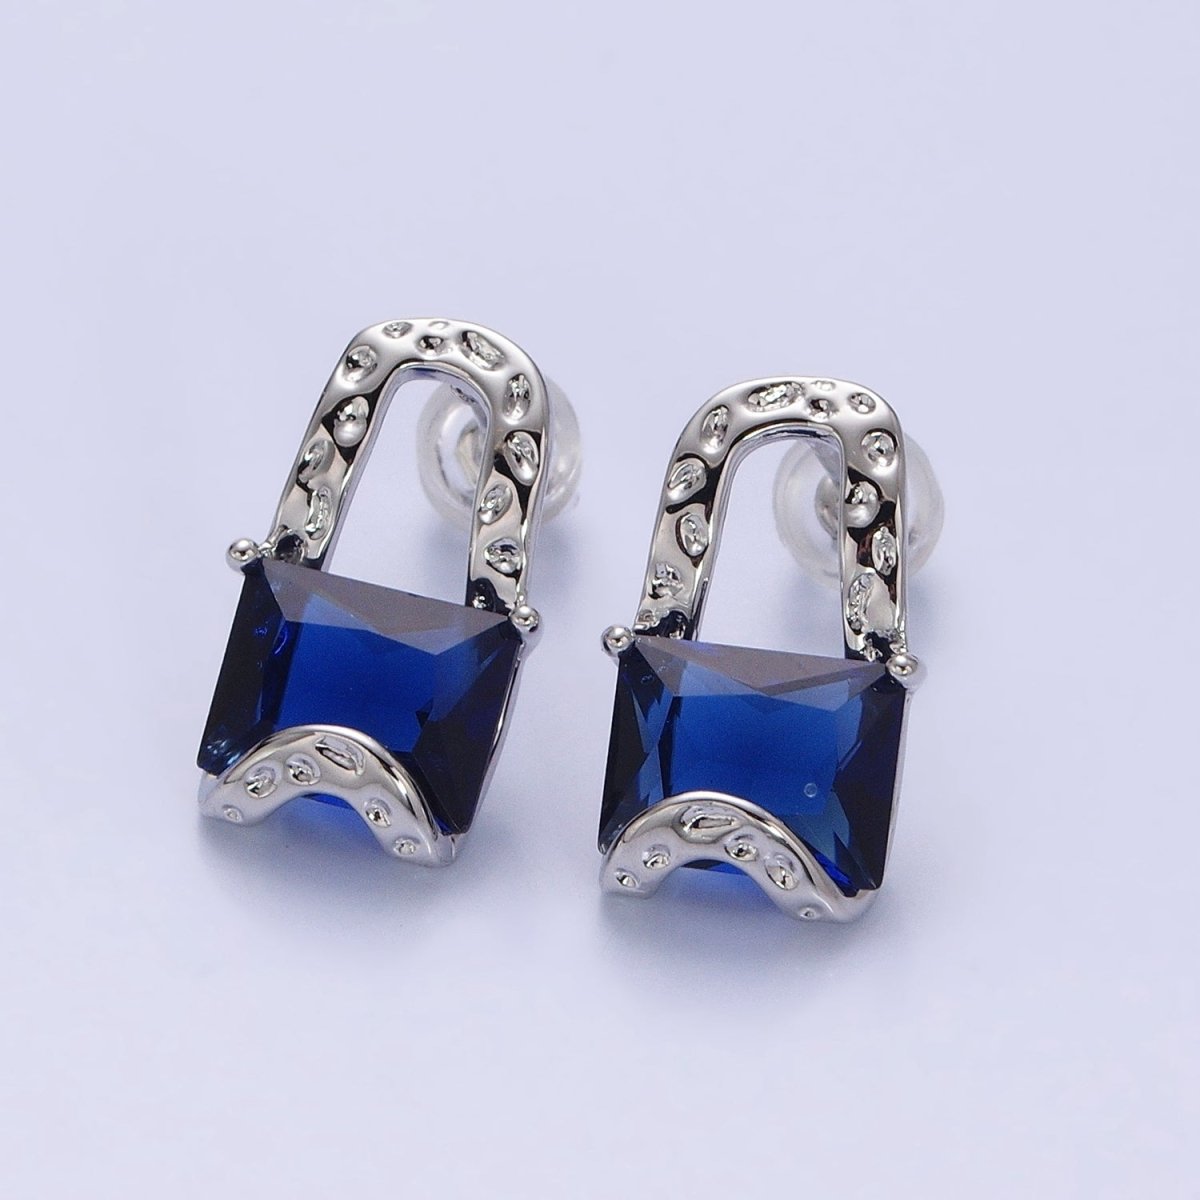 Silver, Gold Fuchsia, Blue, Purple, Clear, Green CZ Baguette Hammered Band Padlock Stud Earrings | AB977 - AB986 - DLUXCA